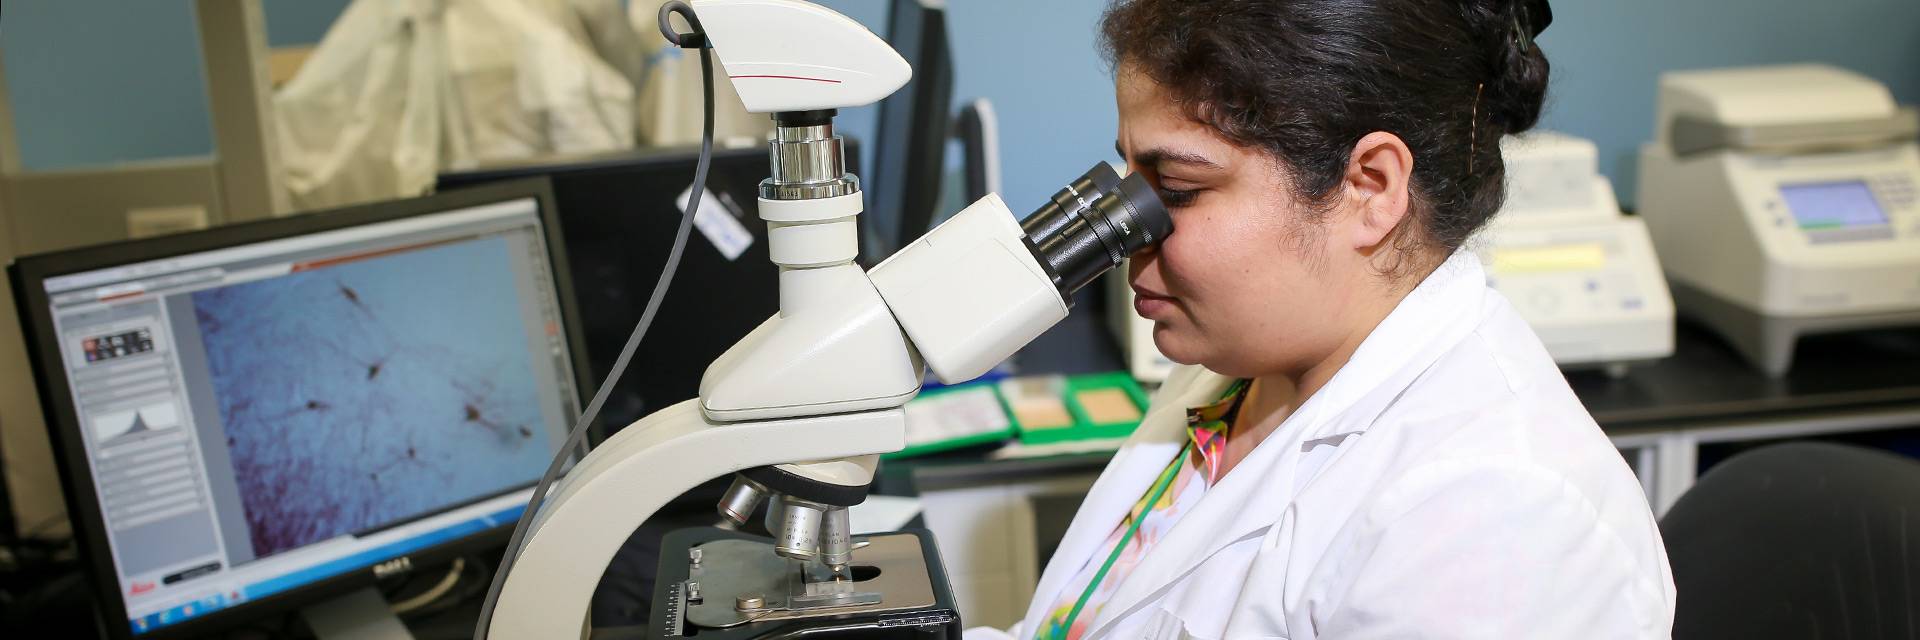 biomedical sciences student at microscope